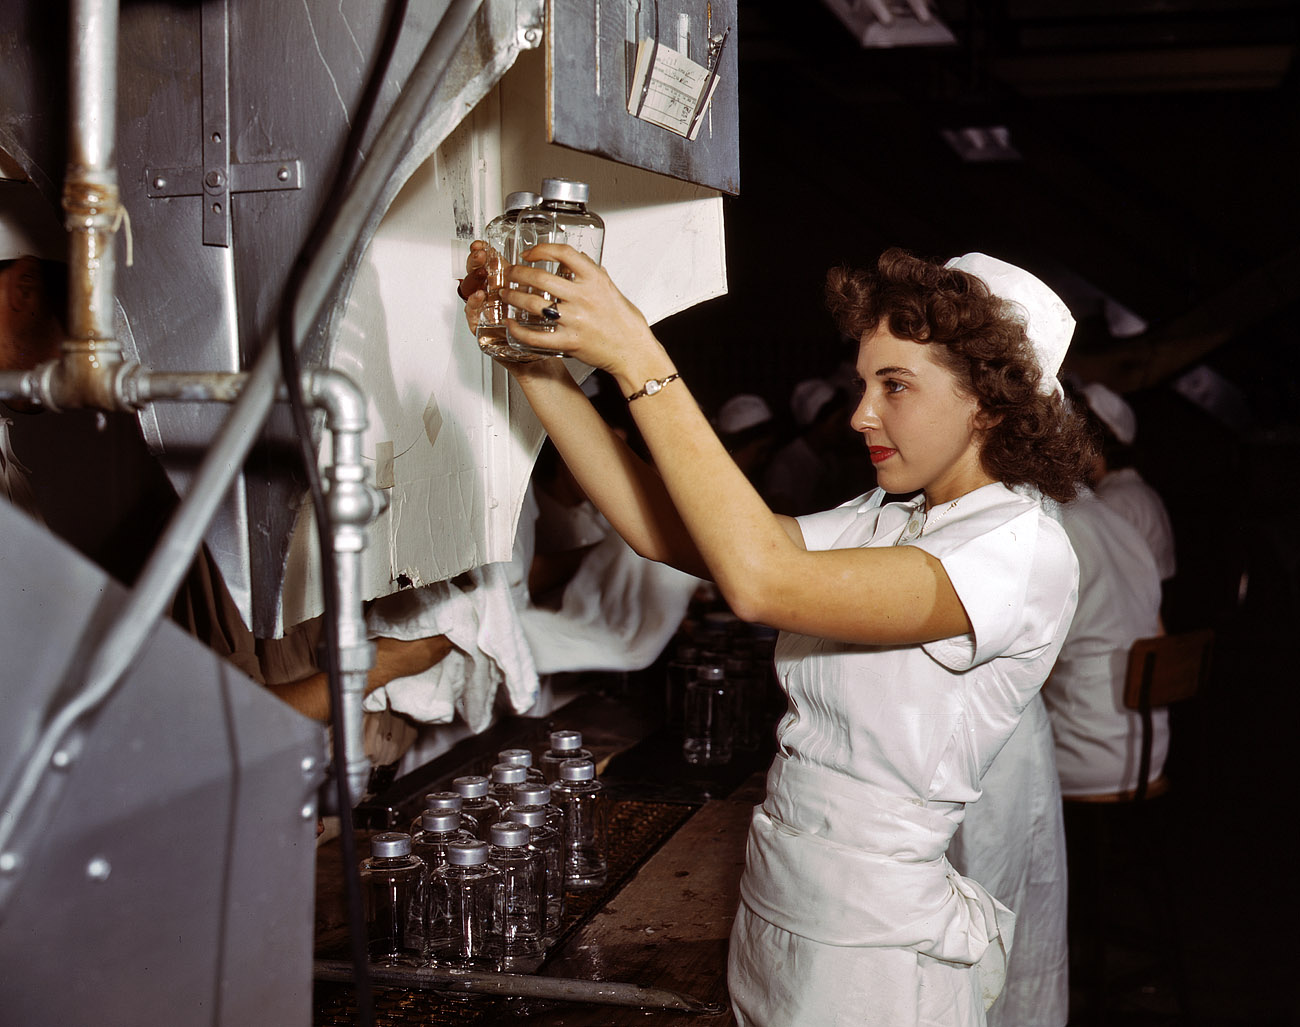 October 1942. Glenview, Illinois. "Transfusion bottles containing intravenous solution are given final inspection by Grace Kruger, one of many women employees at Baxter Laboratories. When her brother left Baxter to join the Merchant Marine, Miss Kruger, a former life insurance clerk, took his place." 4x5 Kodachrome transparency by Howard R. Hollem for the OWI. View full size.